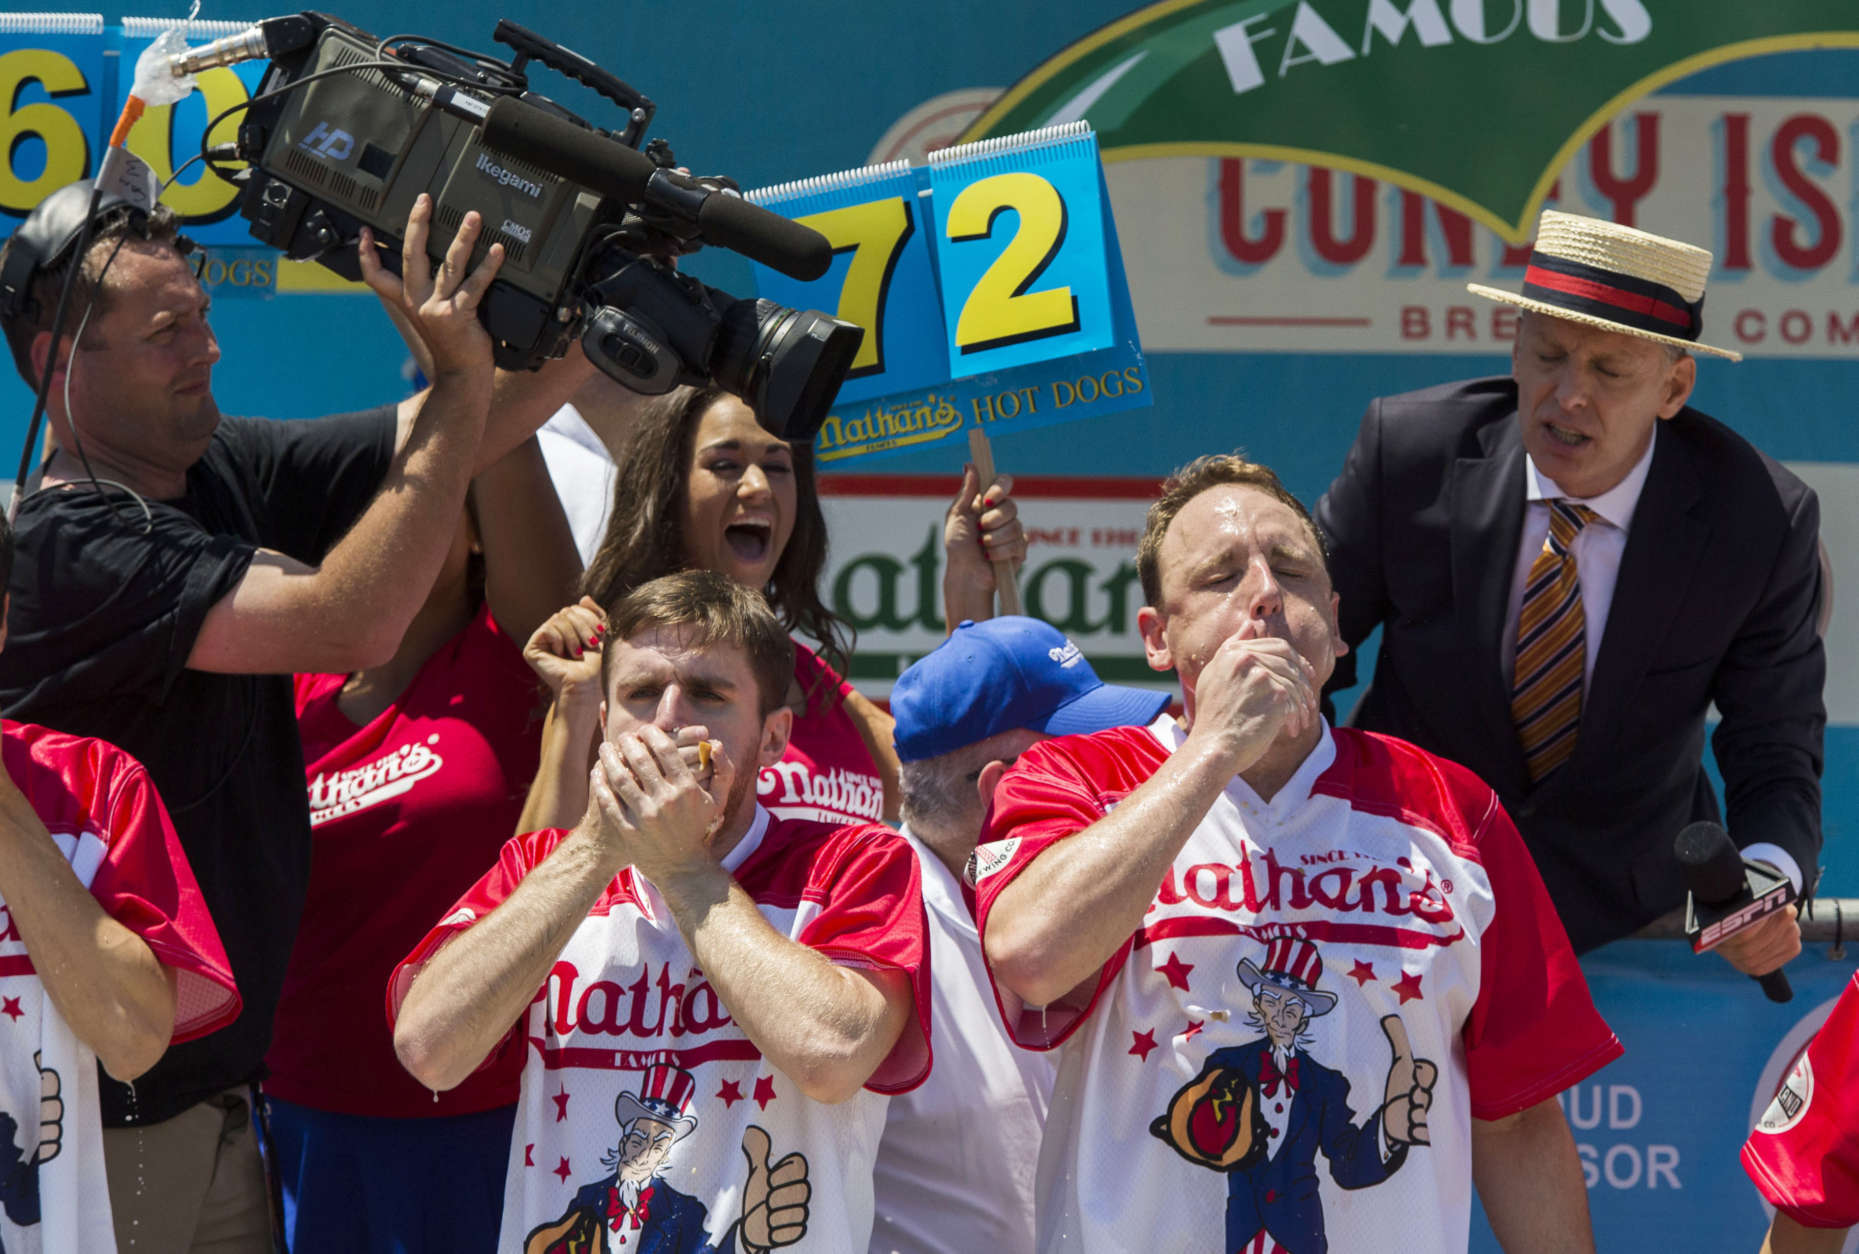 Carmen Ciccotti, left, and Joey Chestnut compete in the Nathan's Famous Hotdog eating contest Tuesday, July 4, 2017, in Brooklyn, New York. Chestnut ate 72 hotdogs in 10 minutes to claim his 10th win. (AP Photo/Michael Noble Jr.)